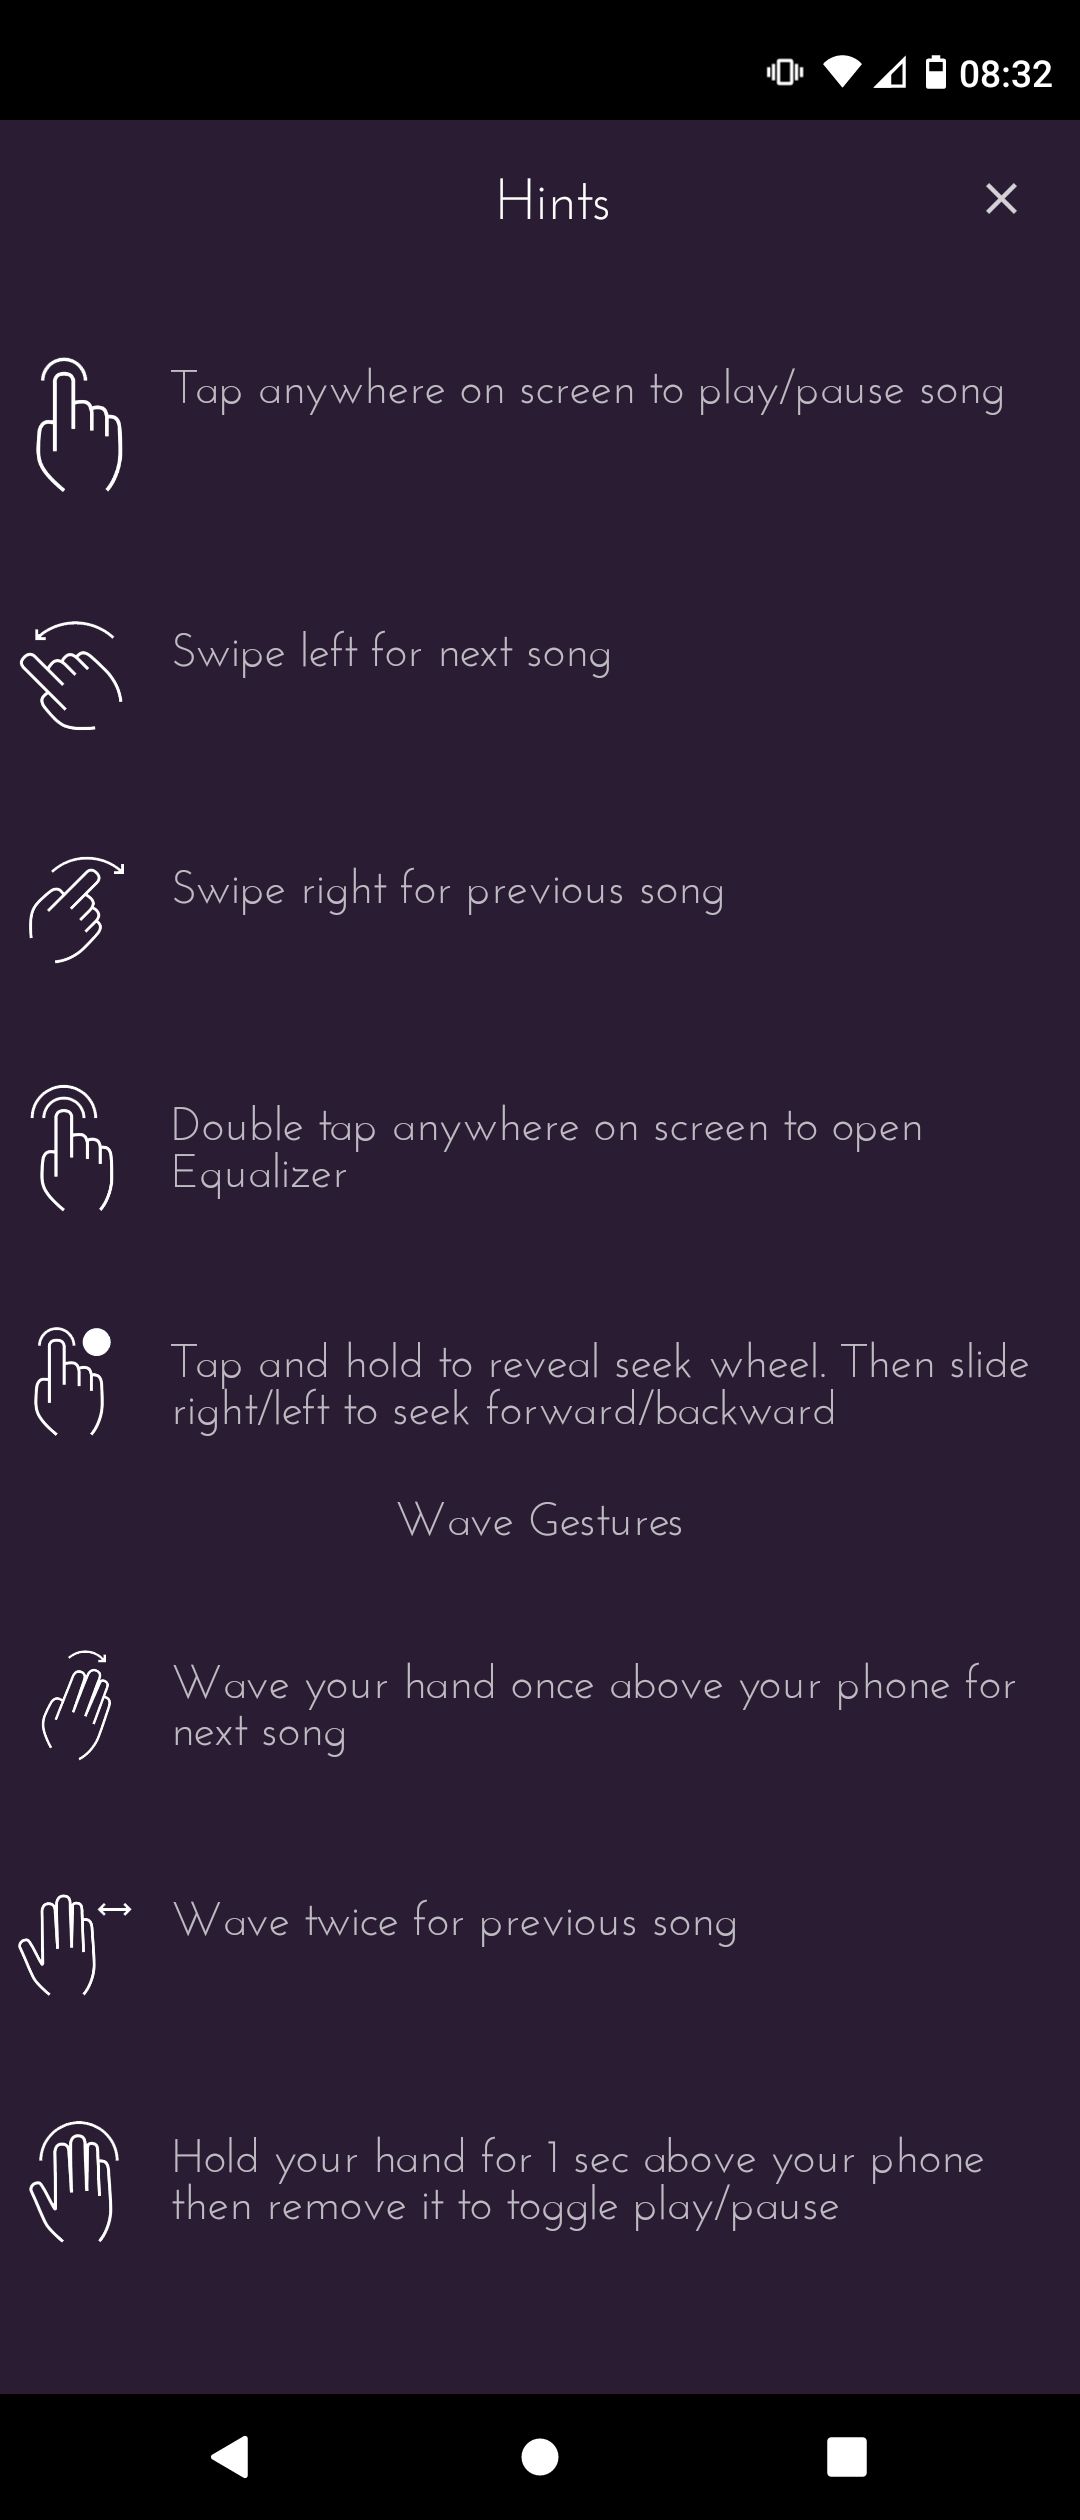 Hand Gesture Hints for Impulse Music Player App